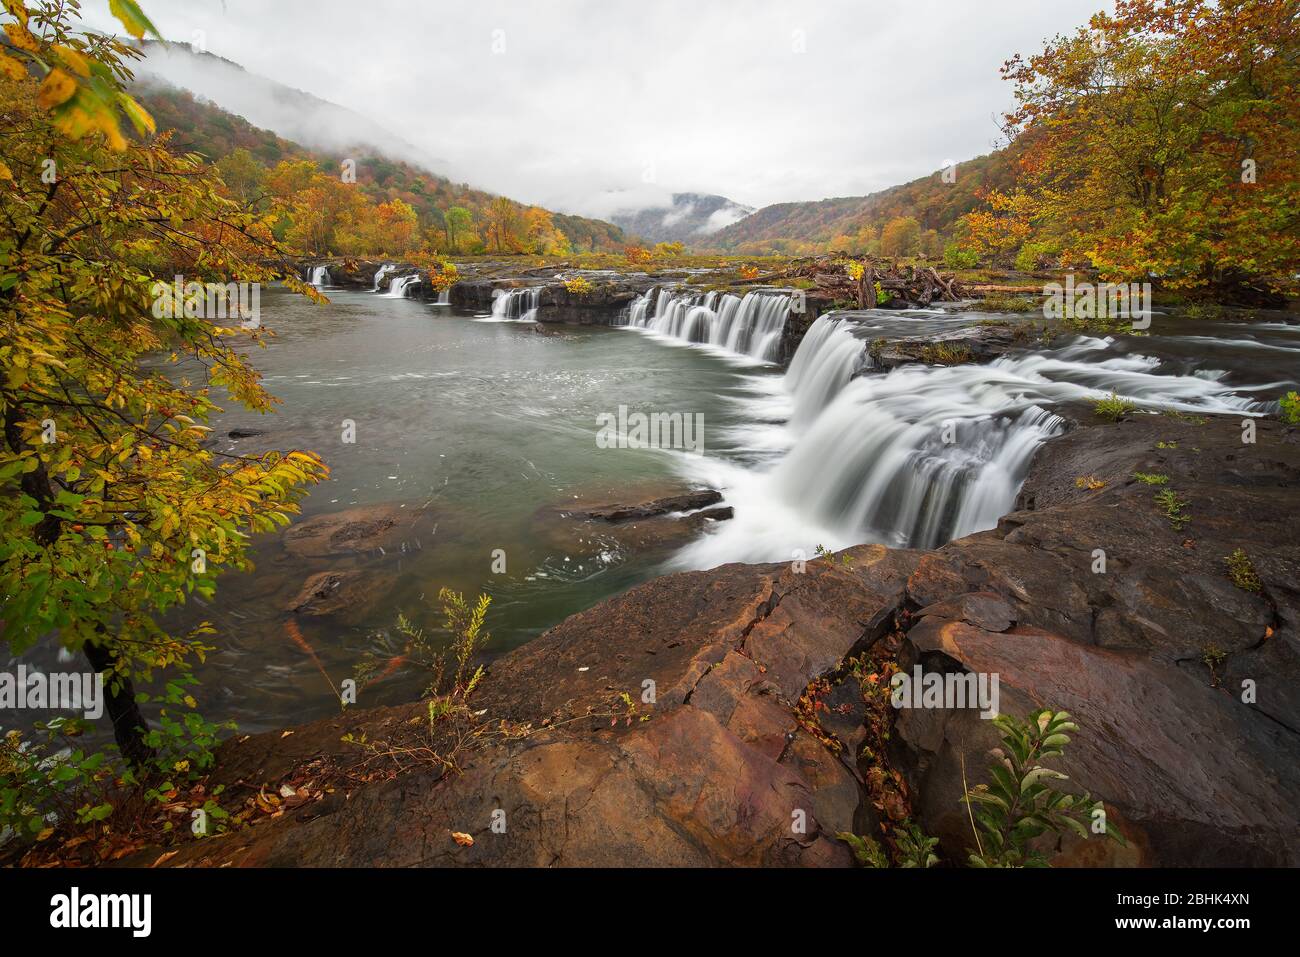 A foggy morning view at Sandstone Falls in autumn on the New River in West Virginia. Stock Photo